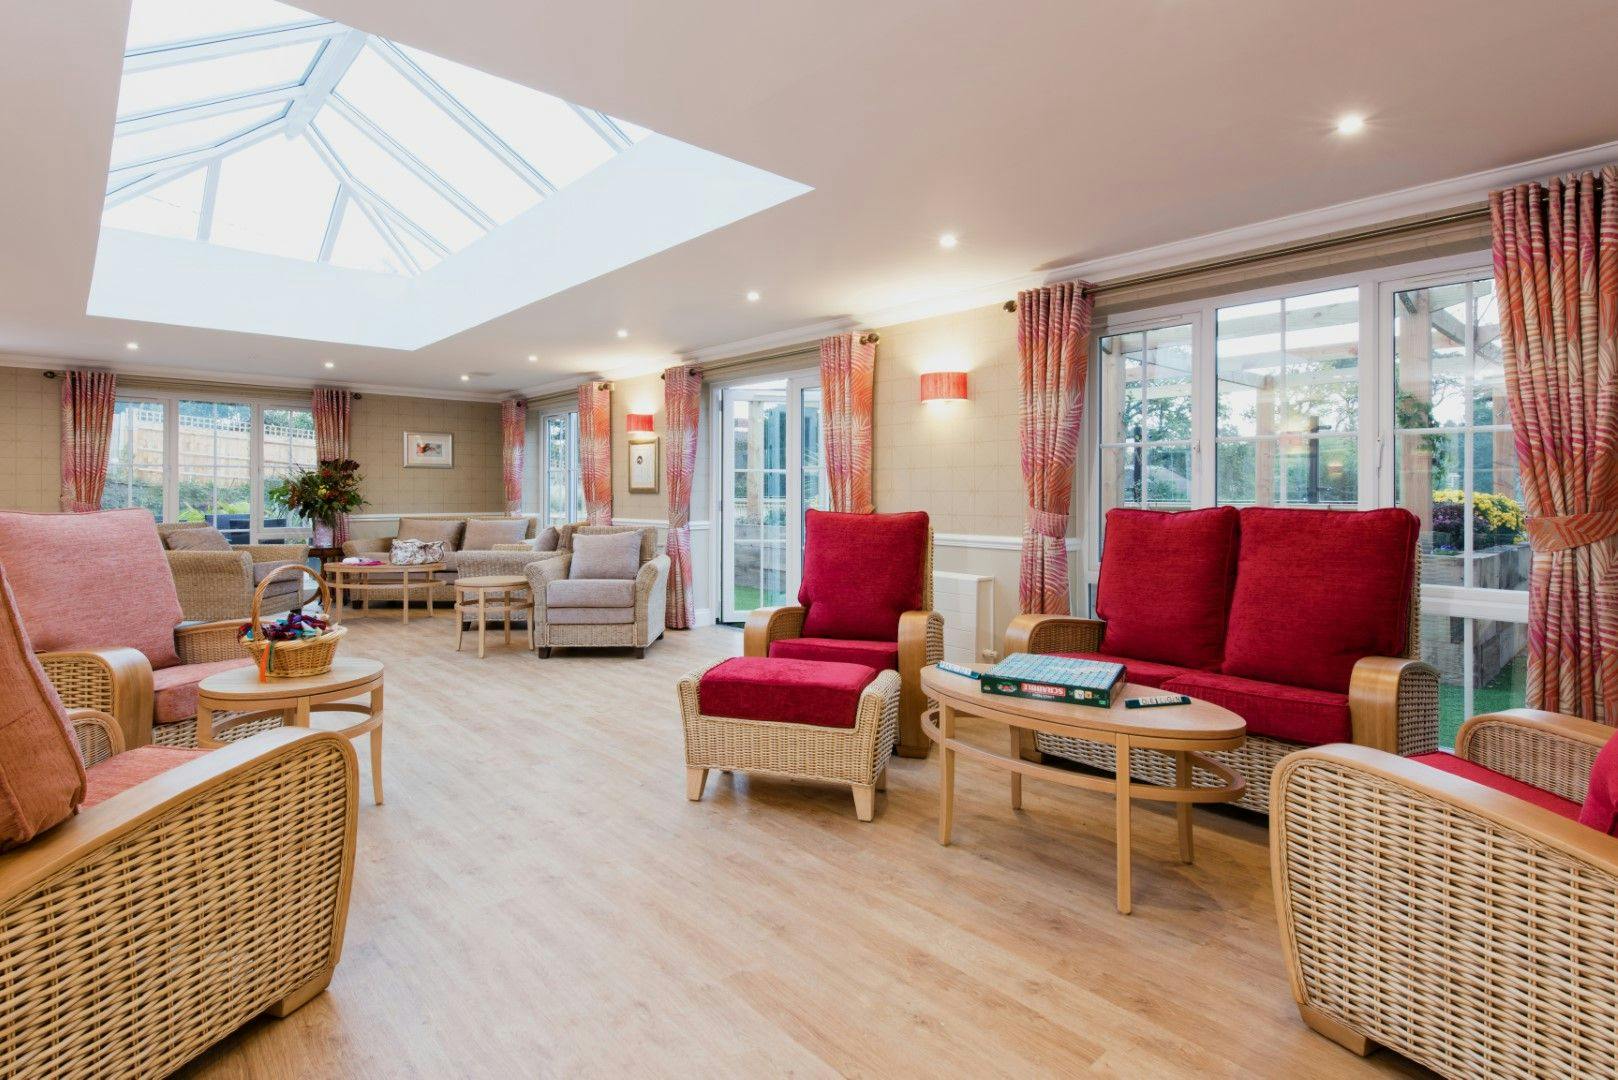 Communal Area at Lakeview Care Home in Surrey, South East England